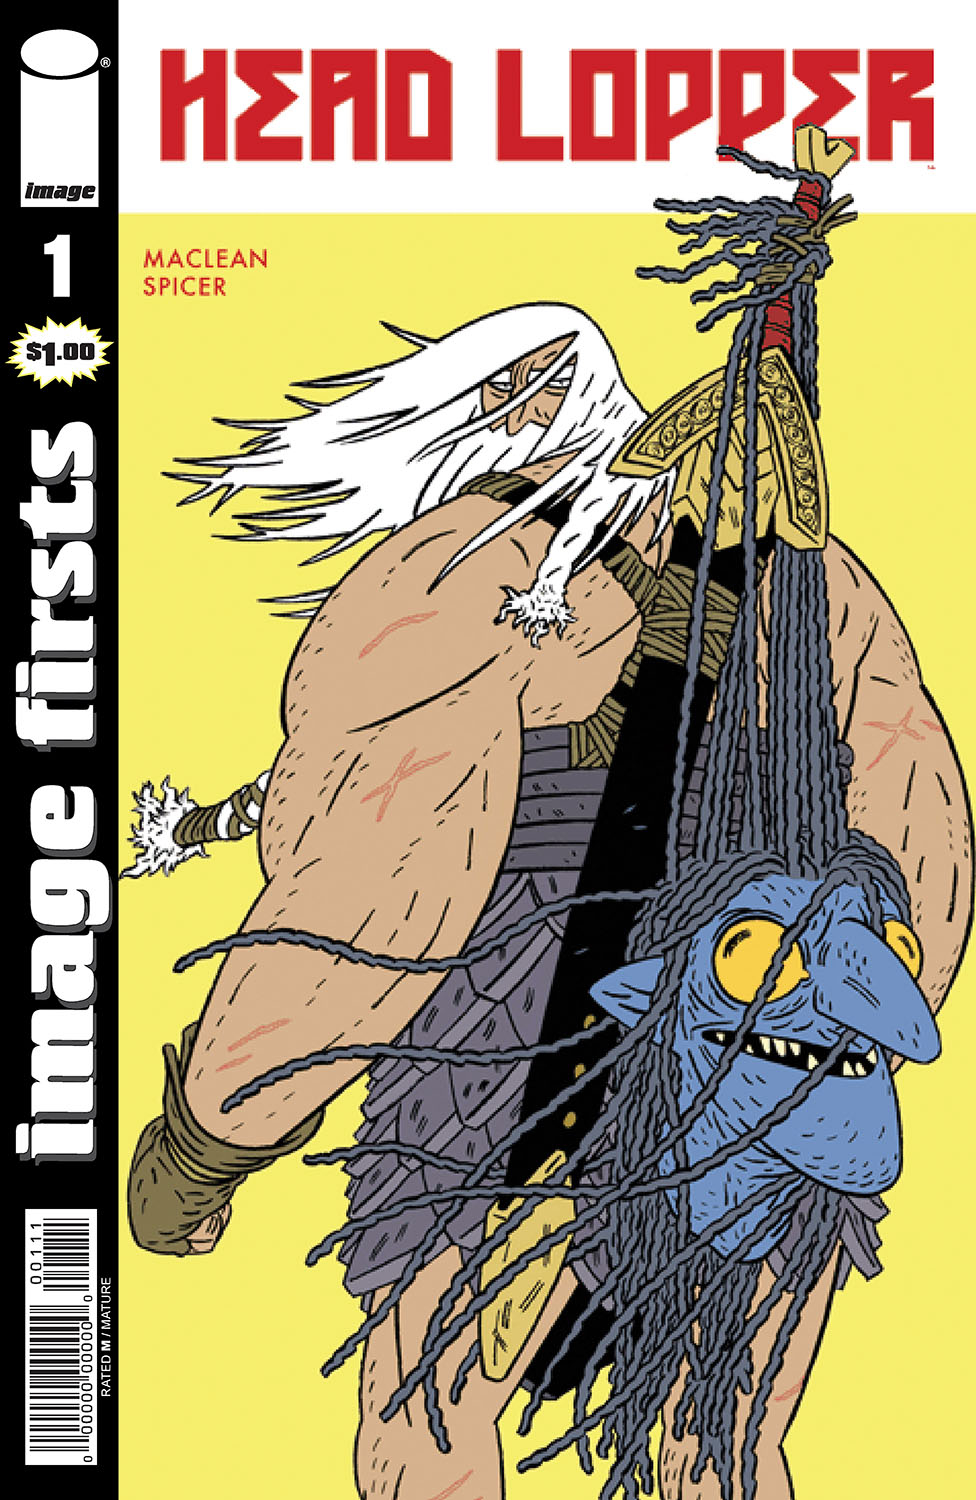 Image Firsts: Head Lopper no. 1 